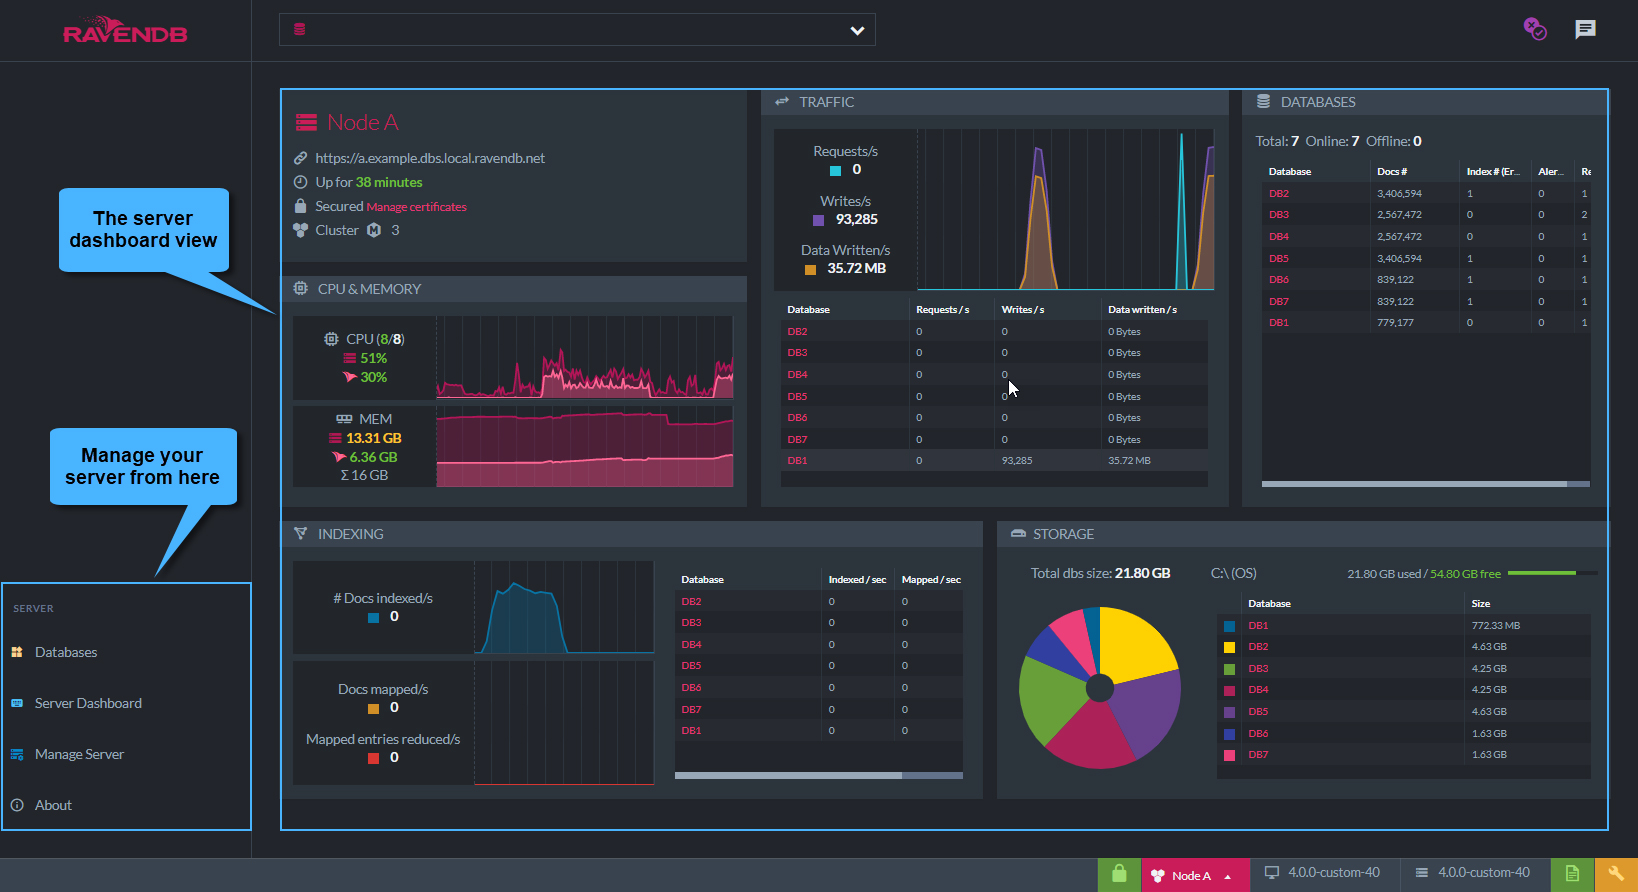 Monitor performance internals with our NoSQL Database GUI